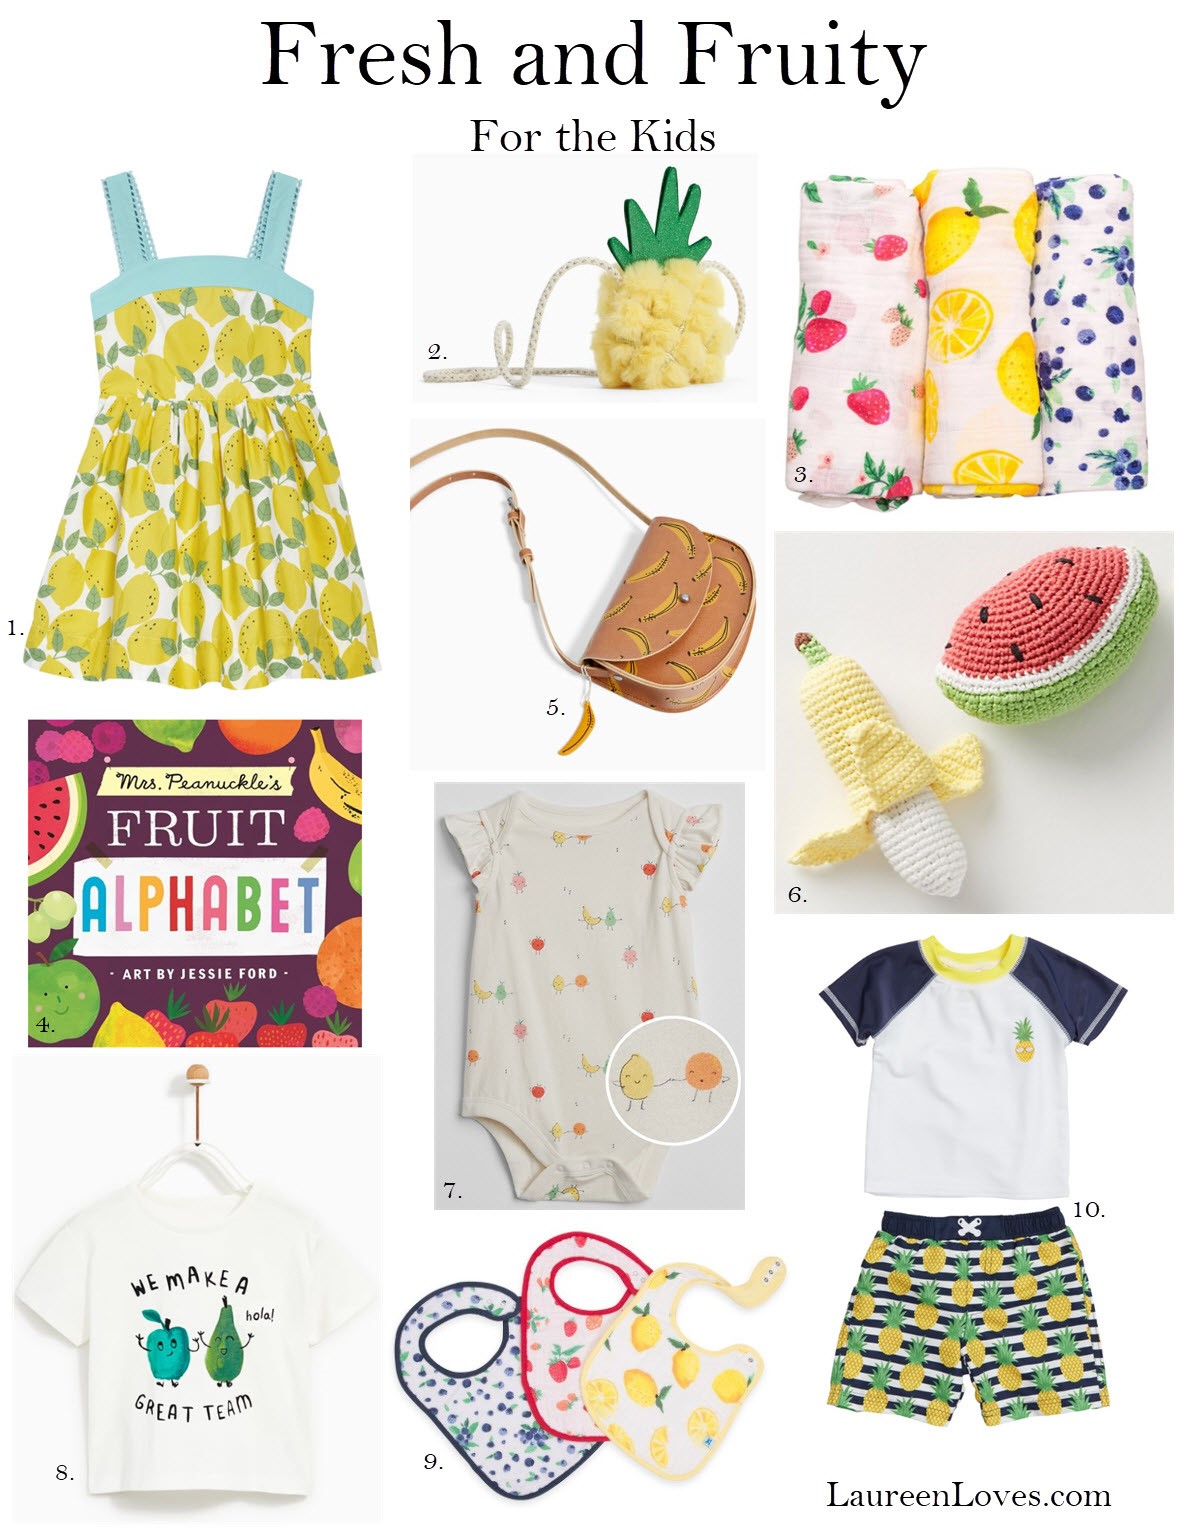 fruit inspired gifts and clothing for kids